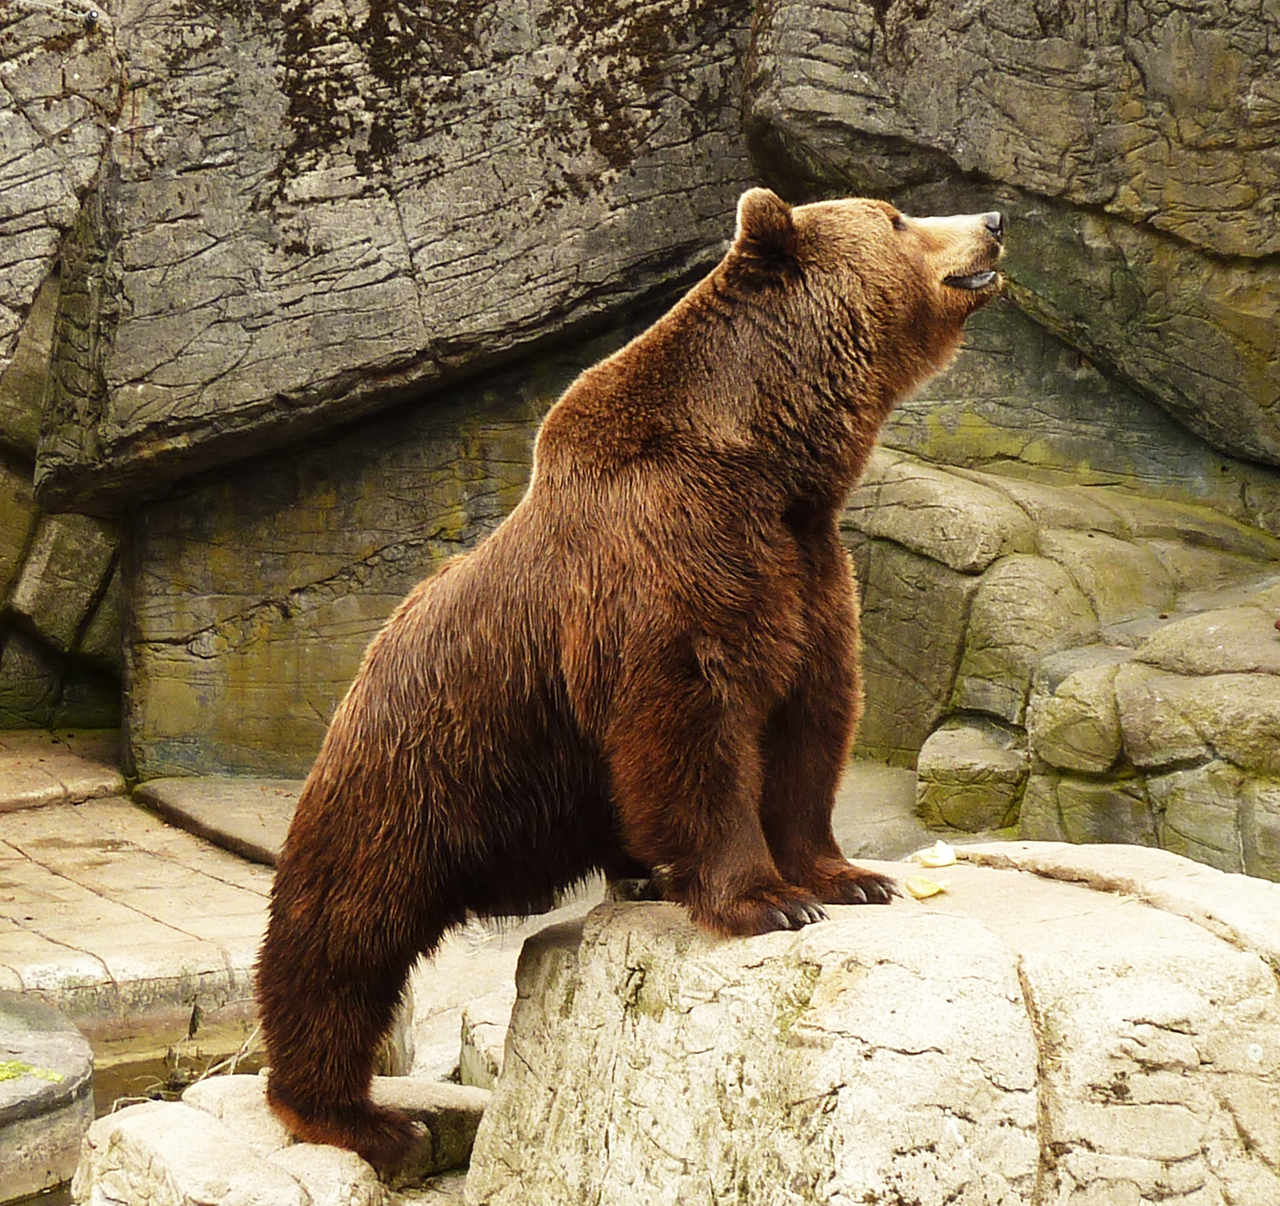 Brown bear in zoo with dinner